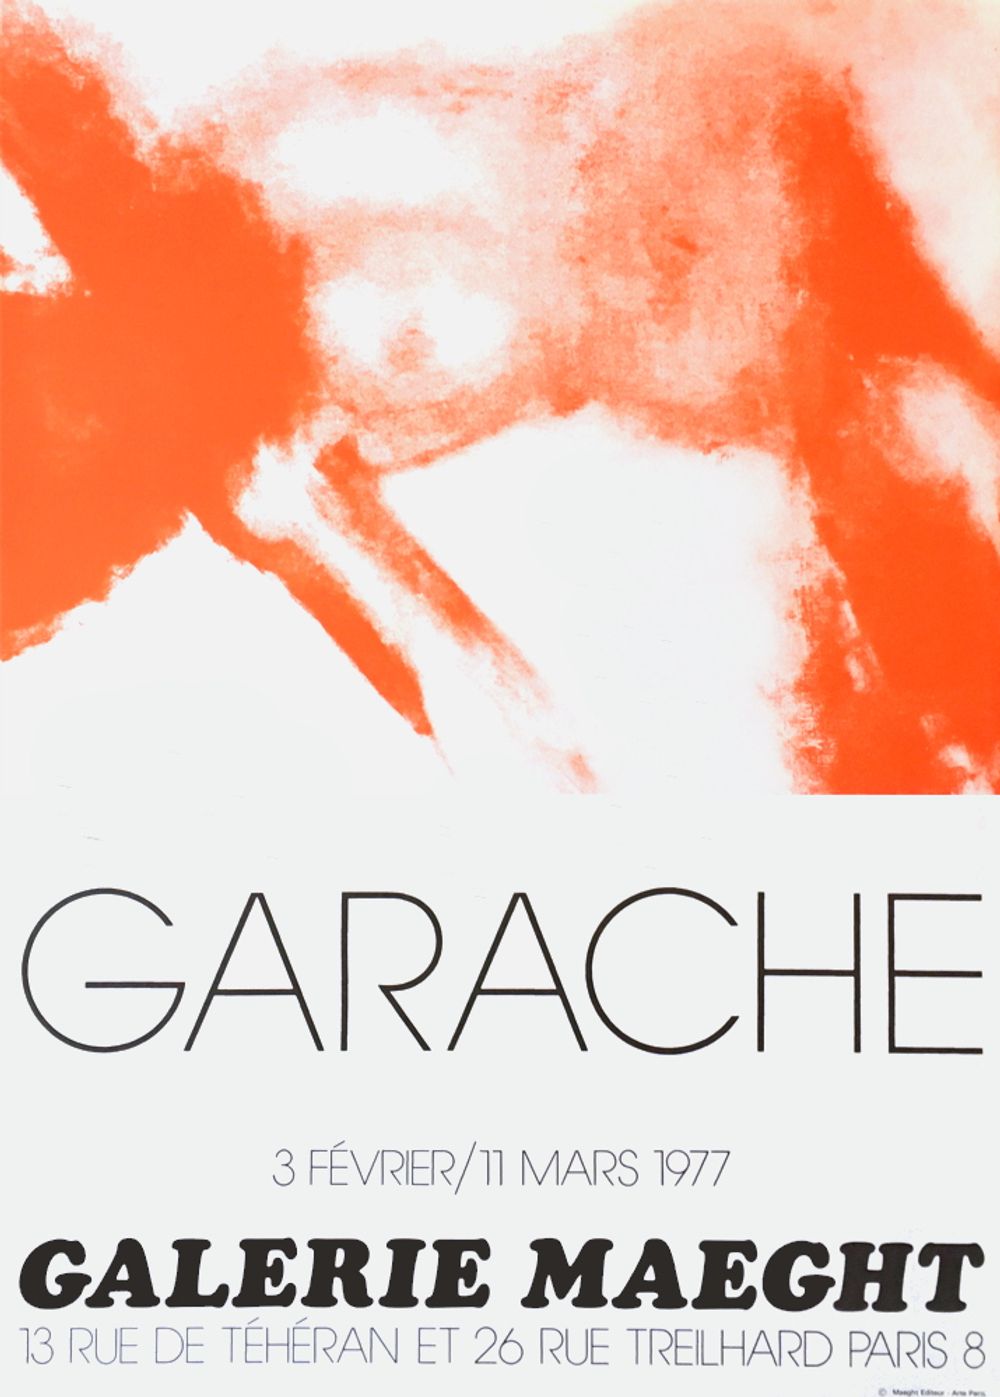 Expo 77- Galerie Maeght